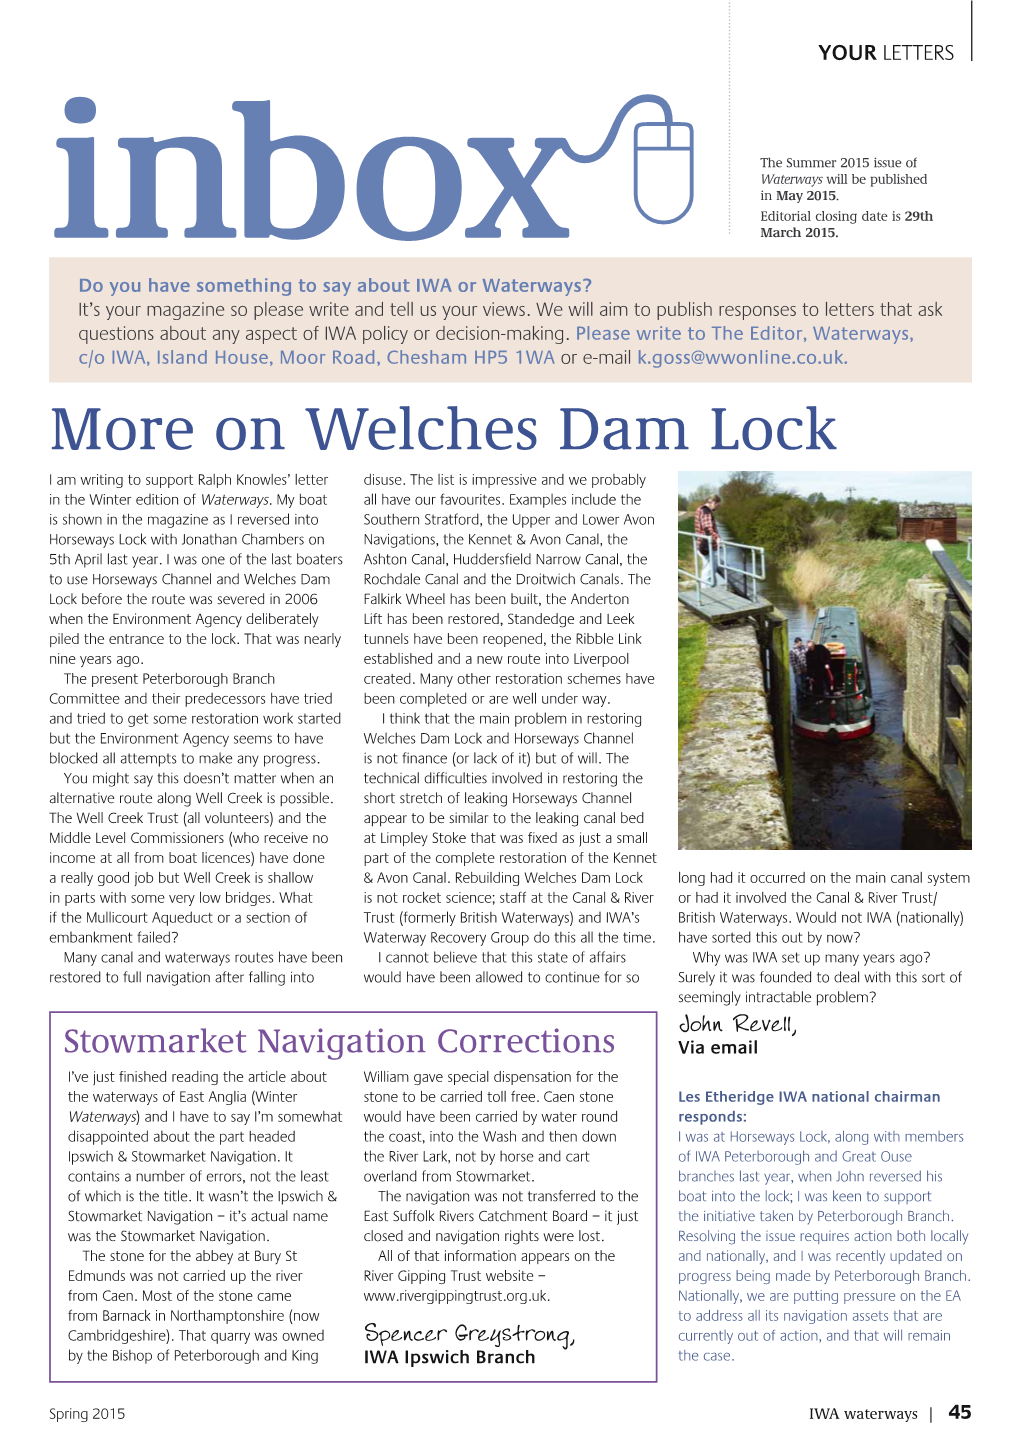 John Revell's Letter More on Welches Dam Lock in the Spring 2015 IWA Waterways